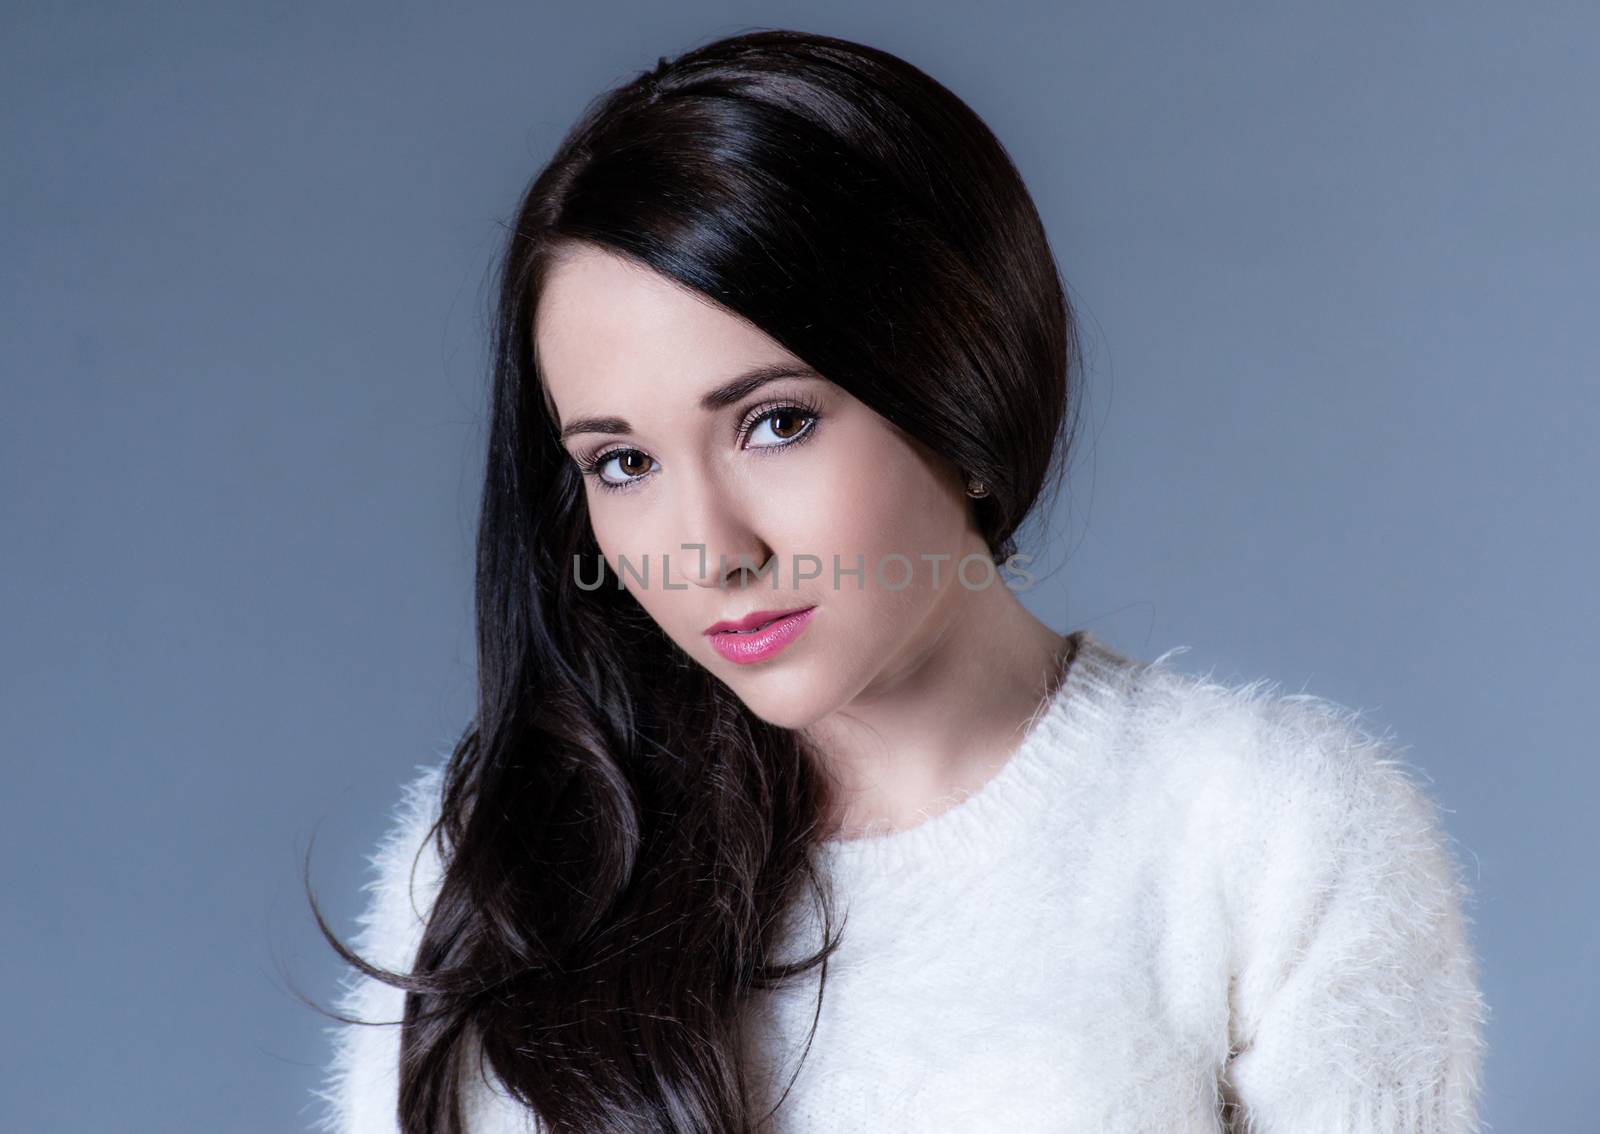 beautiful dark haired woman in white sweater on blue background